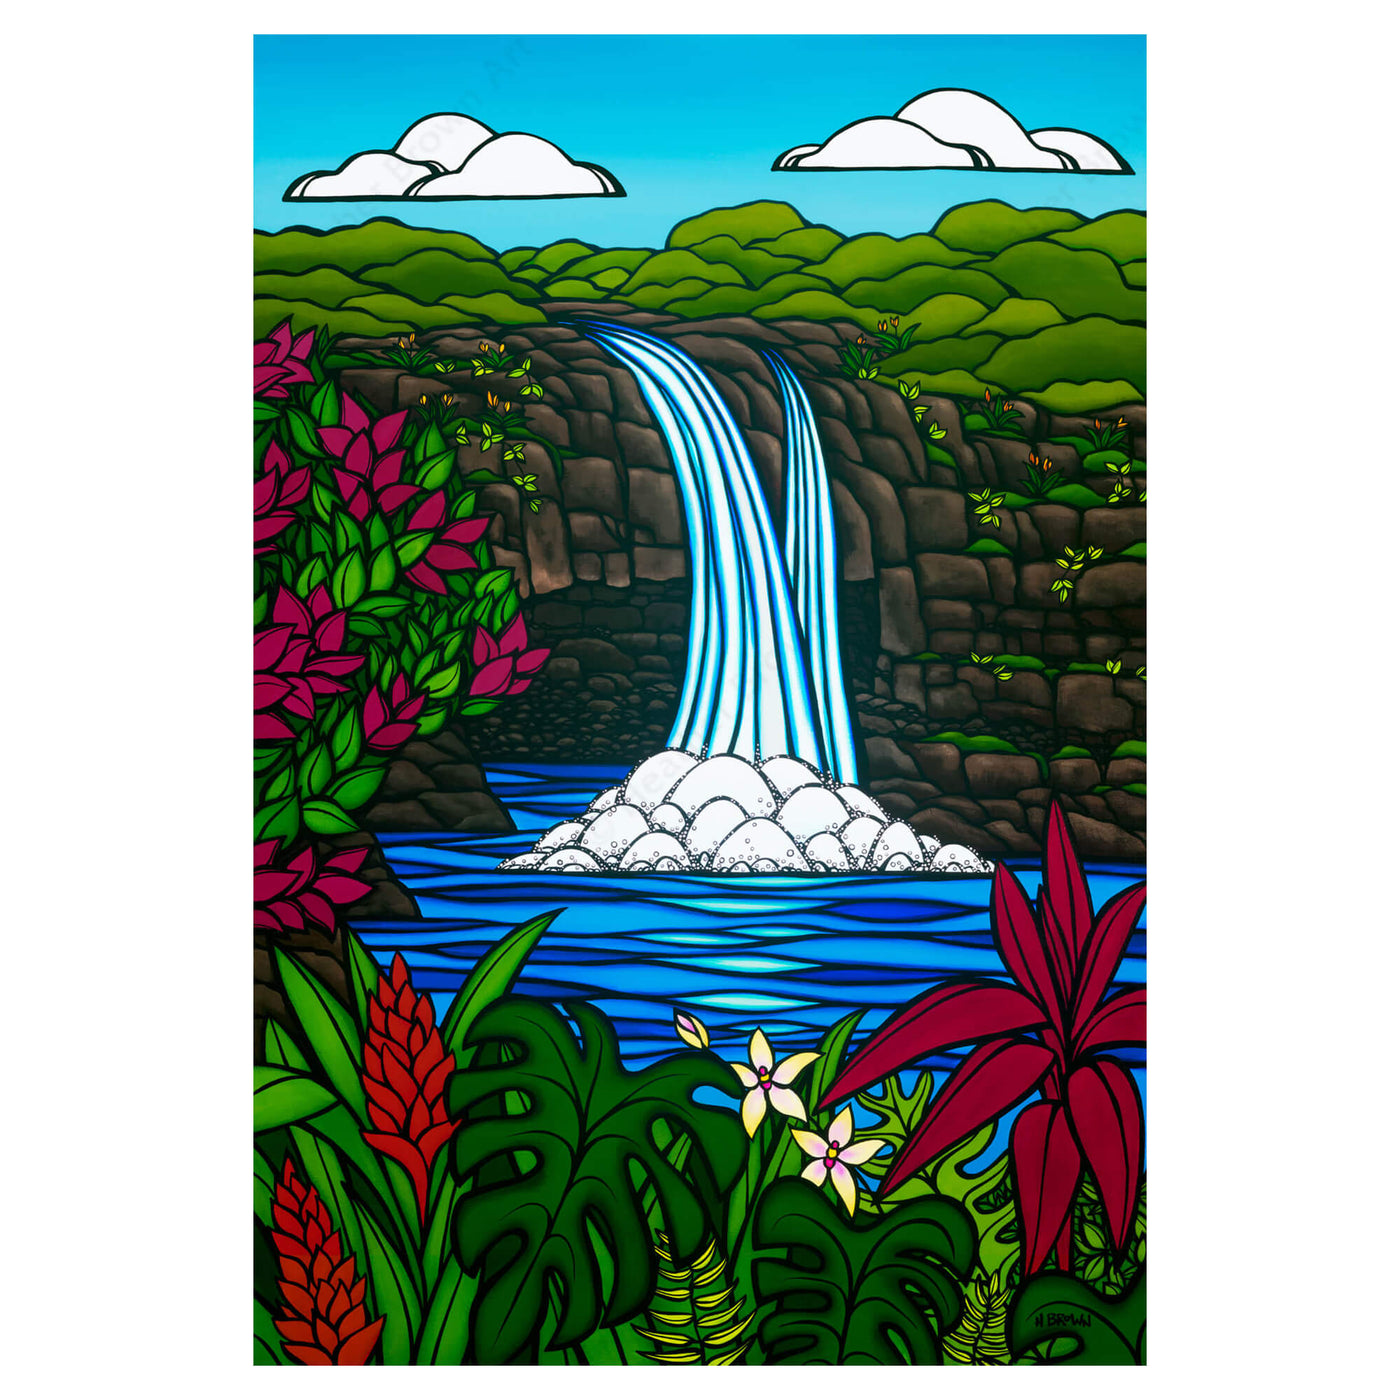 A matted art print featuring a tranquil pool, waterfall, tropical flowers, mountains, and a beautiful blue sky by Hawaii surf artist Heather Brown